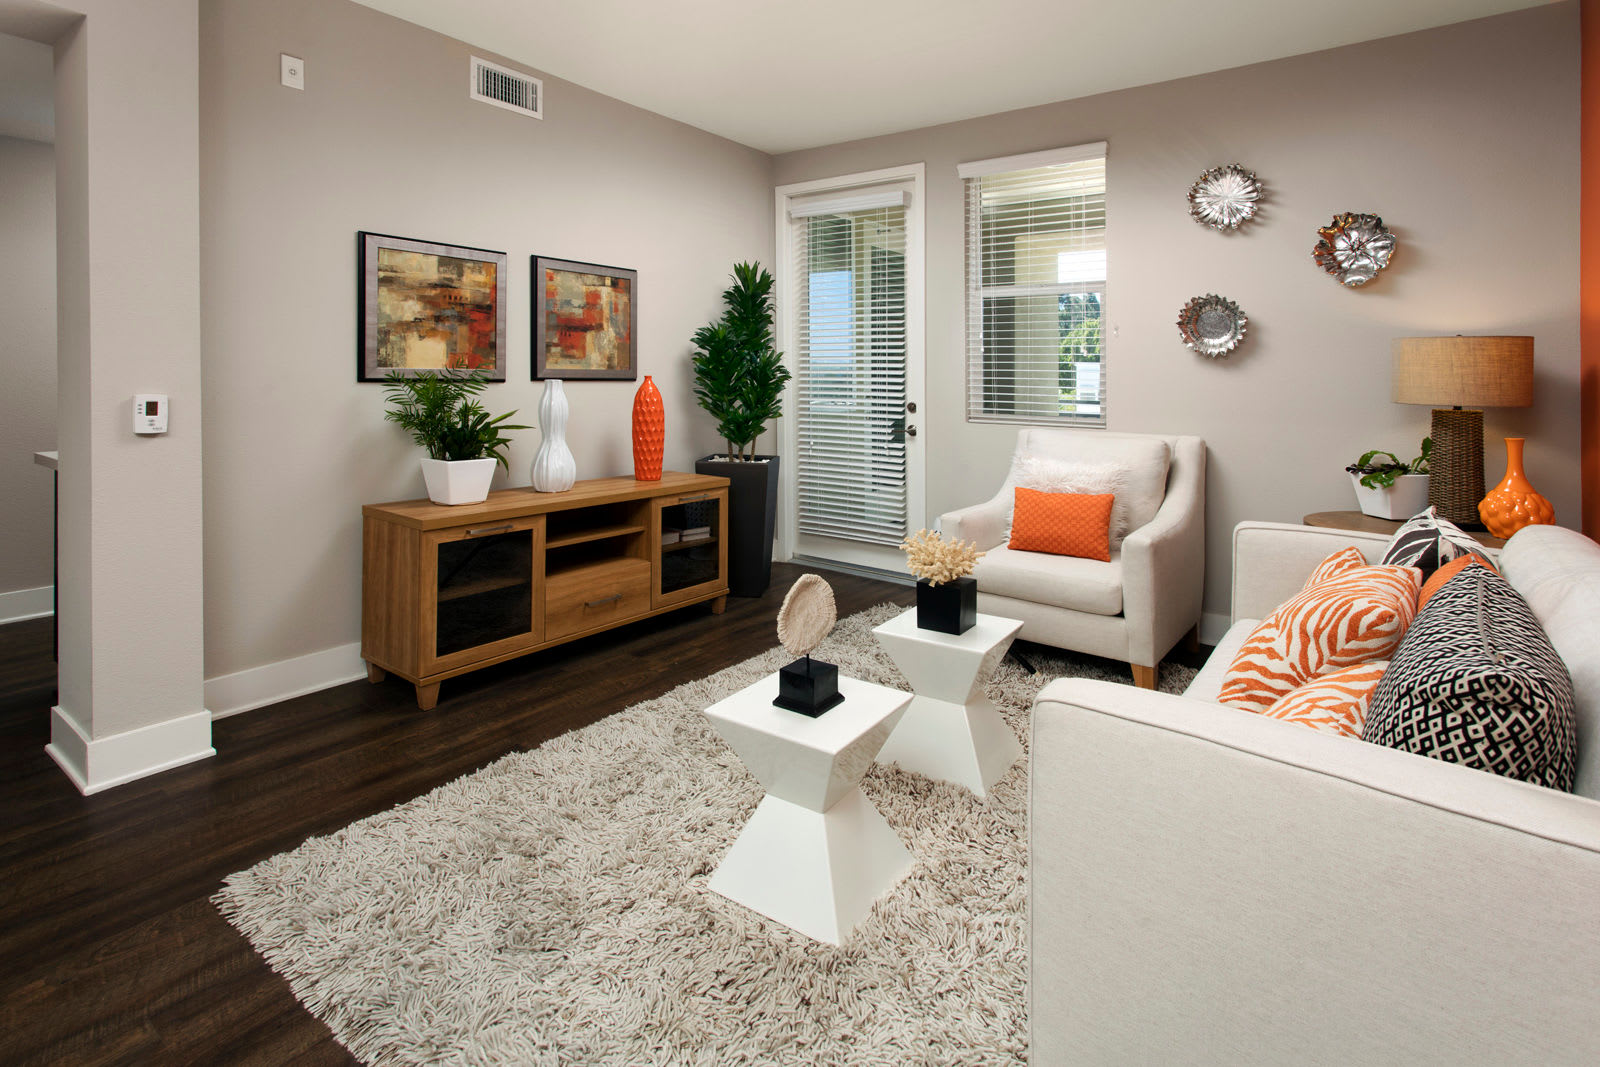 Living room at The Boulevard Apartment Homes in Woodland Hills, California